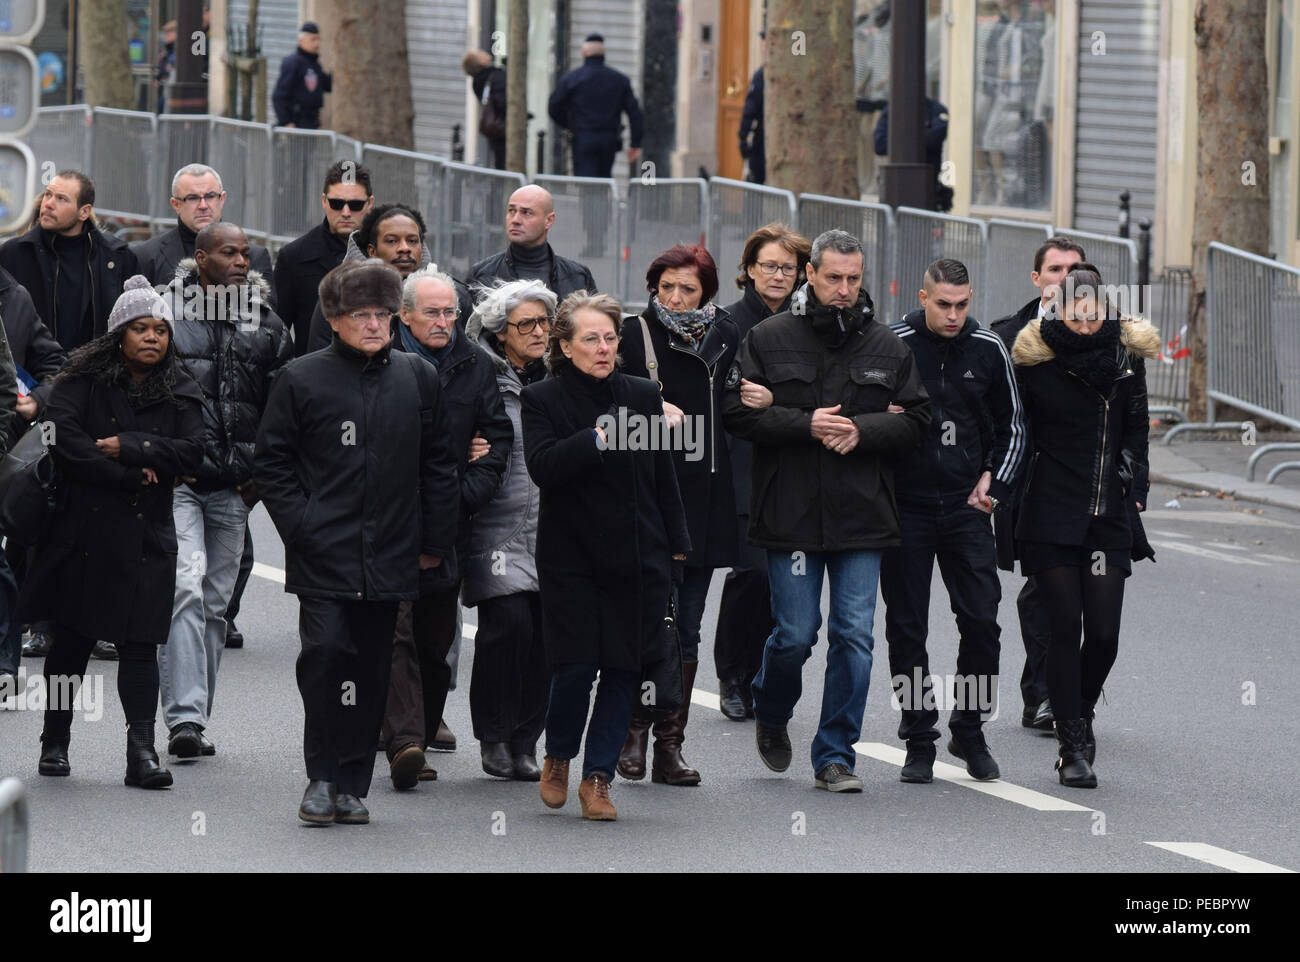 January 11, 2015 - Paris, France:  Family members and close friends of the police officers killed in the recent Paris terrorist attack arrive for a mass unity rally. Four million people demonstrated across the country in a 'Marche Republicaine' (Republican March) celebrating the nation's unity in face of terrorist threats. Thousands of people had banners or cartoons referring to Charlie Hebdo, the satirical magazine whose office was targeted by Islamist gunmen earlier in the week. La grande marche republicaine en hommage aux victimes de l'attentat contre Charlie Hebdo a rassemble pres de 2 mil Stock Photo